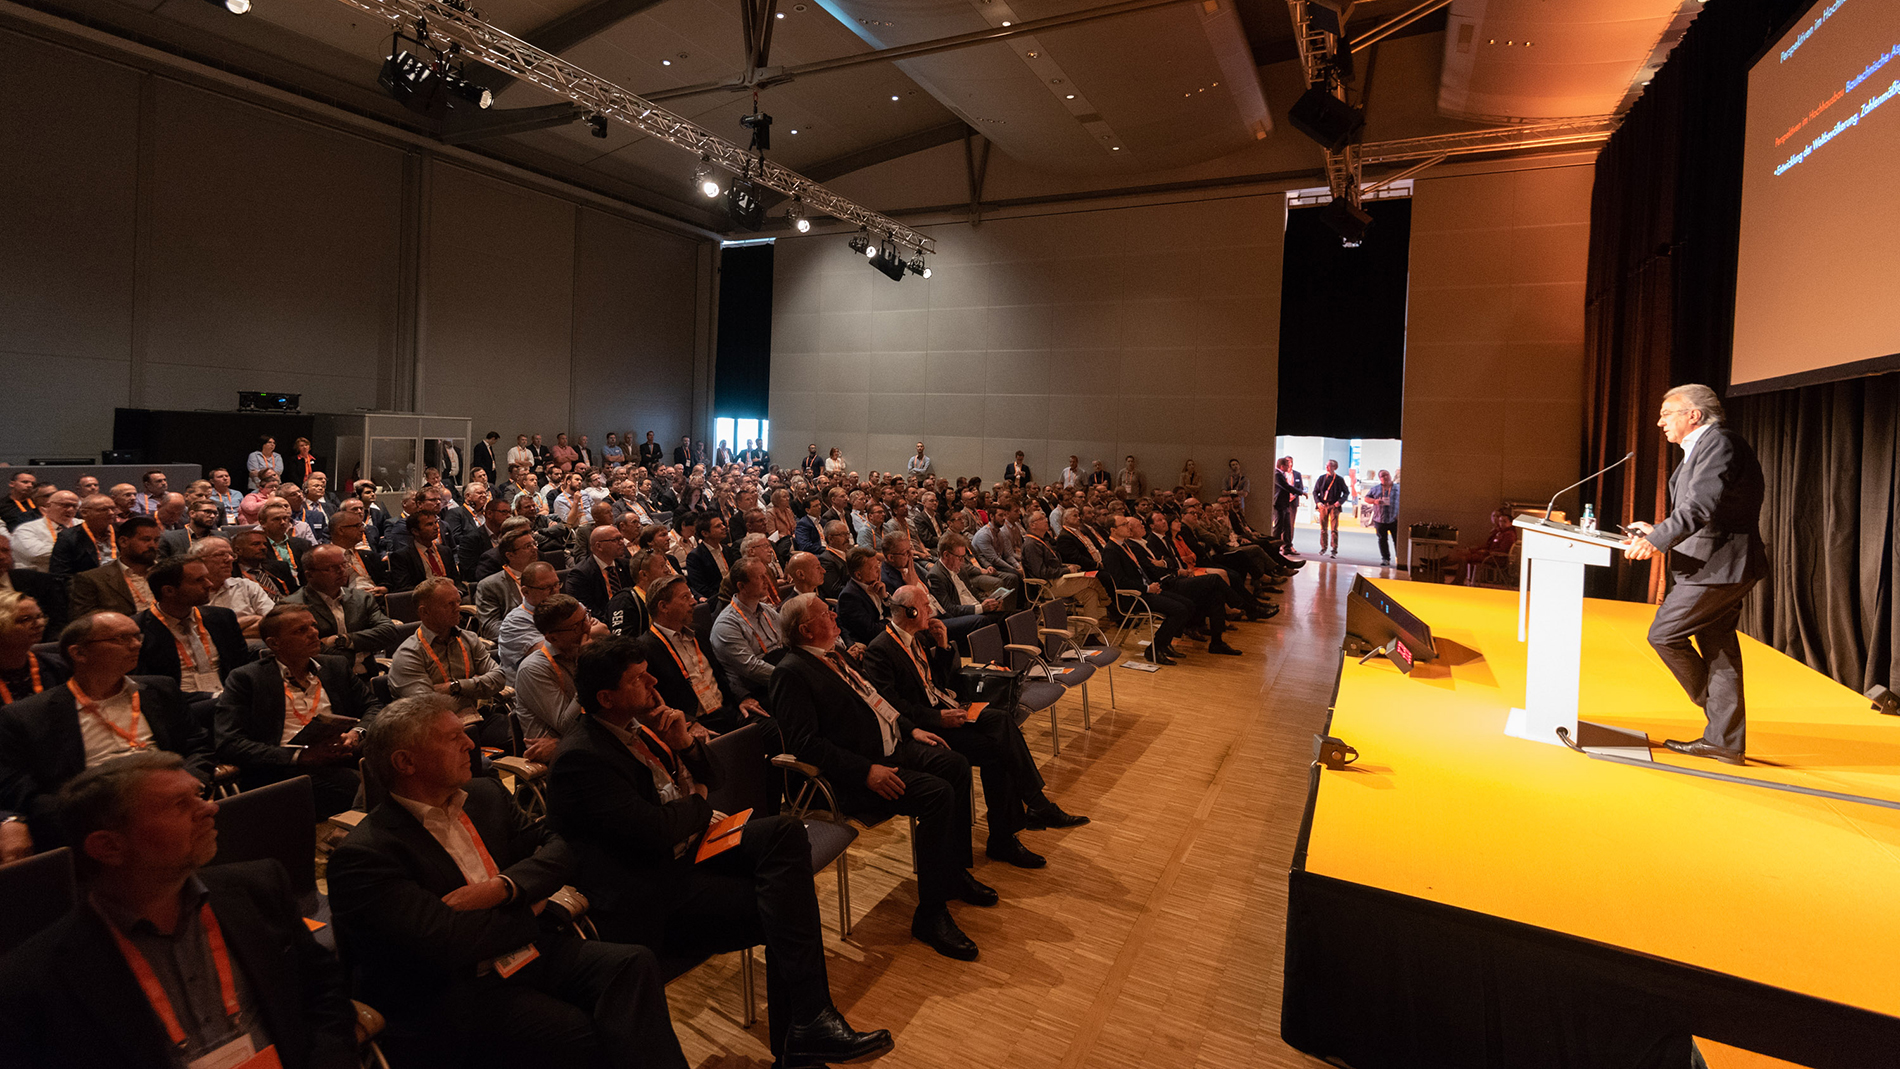 E2 Forum Frankfurt 2018: Forum of innovations, impulses and contacts for around  420 experts for vertical and horizontal mobility in tomorrow’s buildings (Image: Messe Frankfurt GmbH / Sandra Gätke)